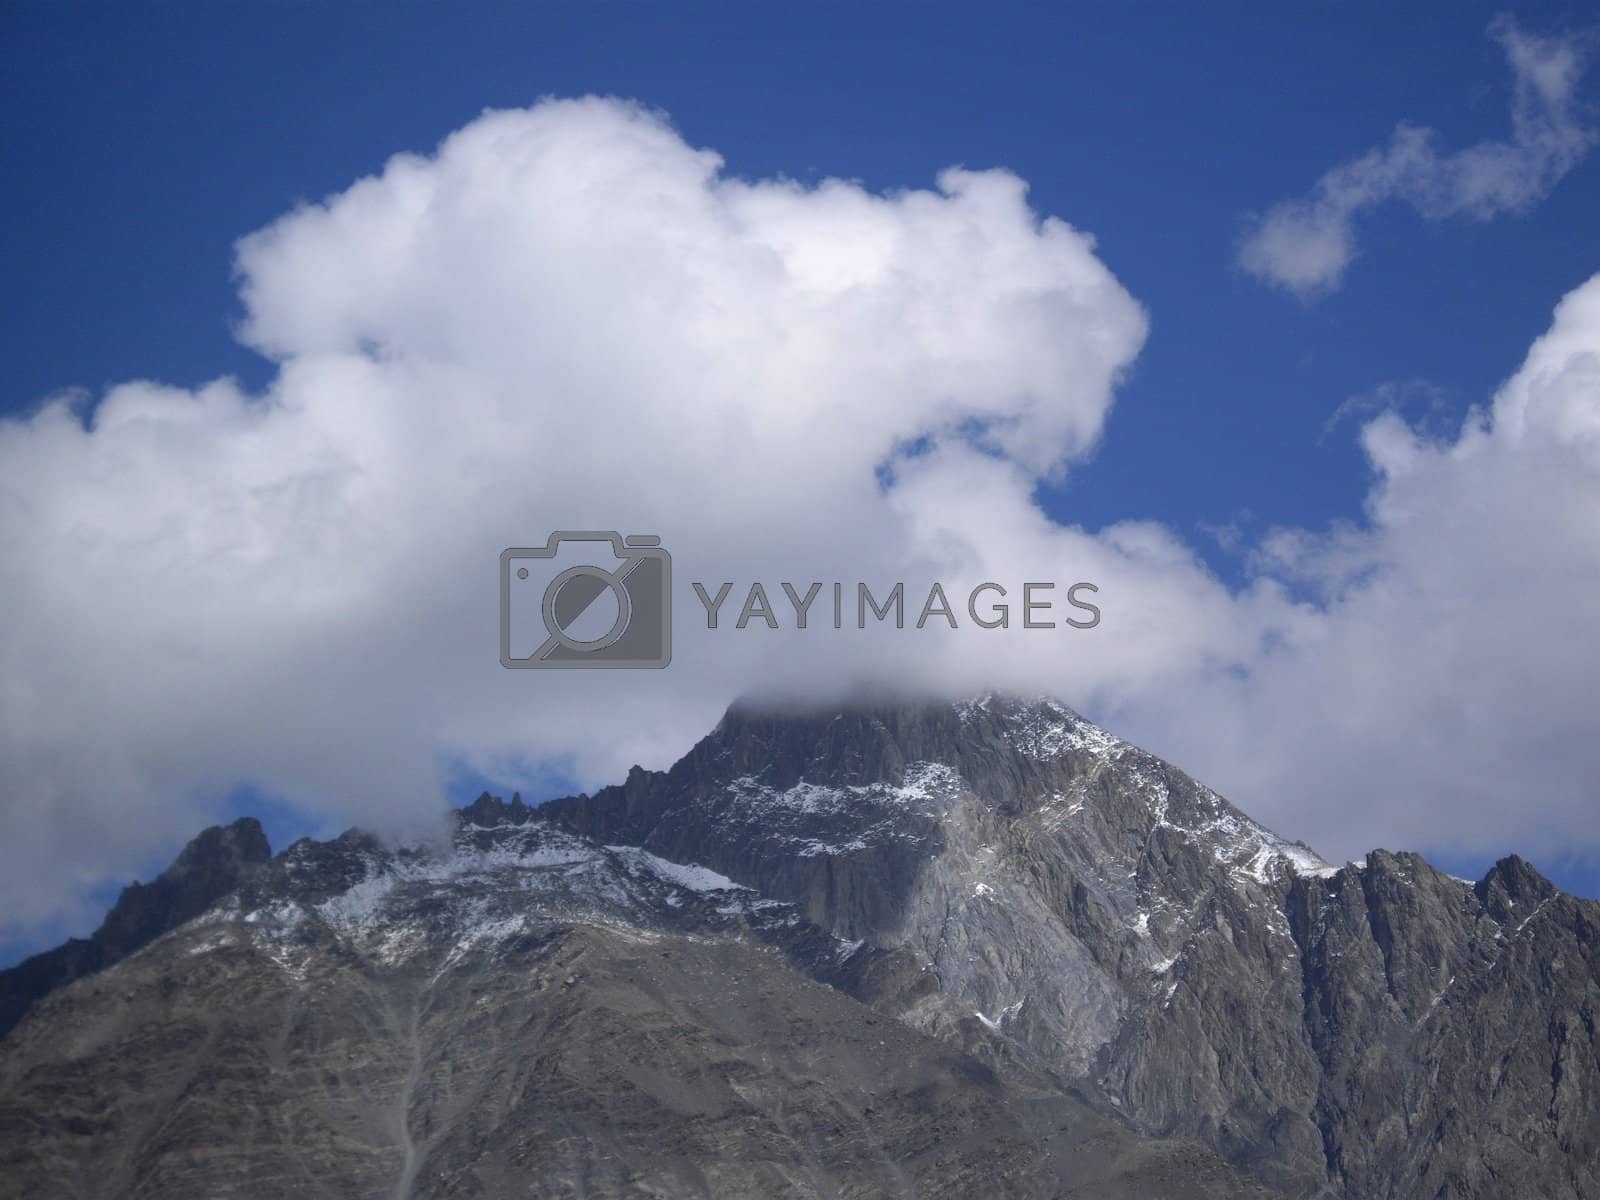 Royalty free image of Caucasus mountains on the territory of Georgia by Elet